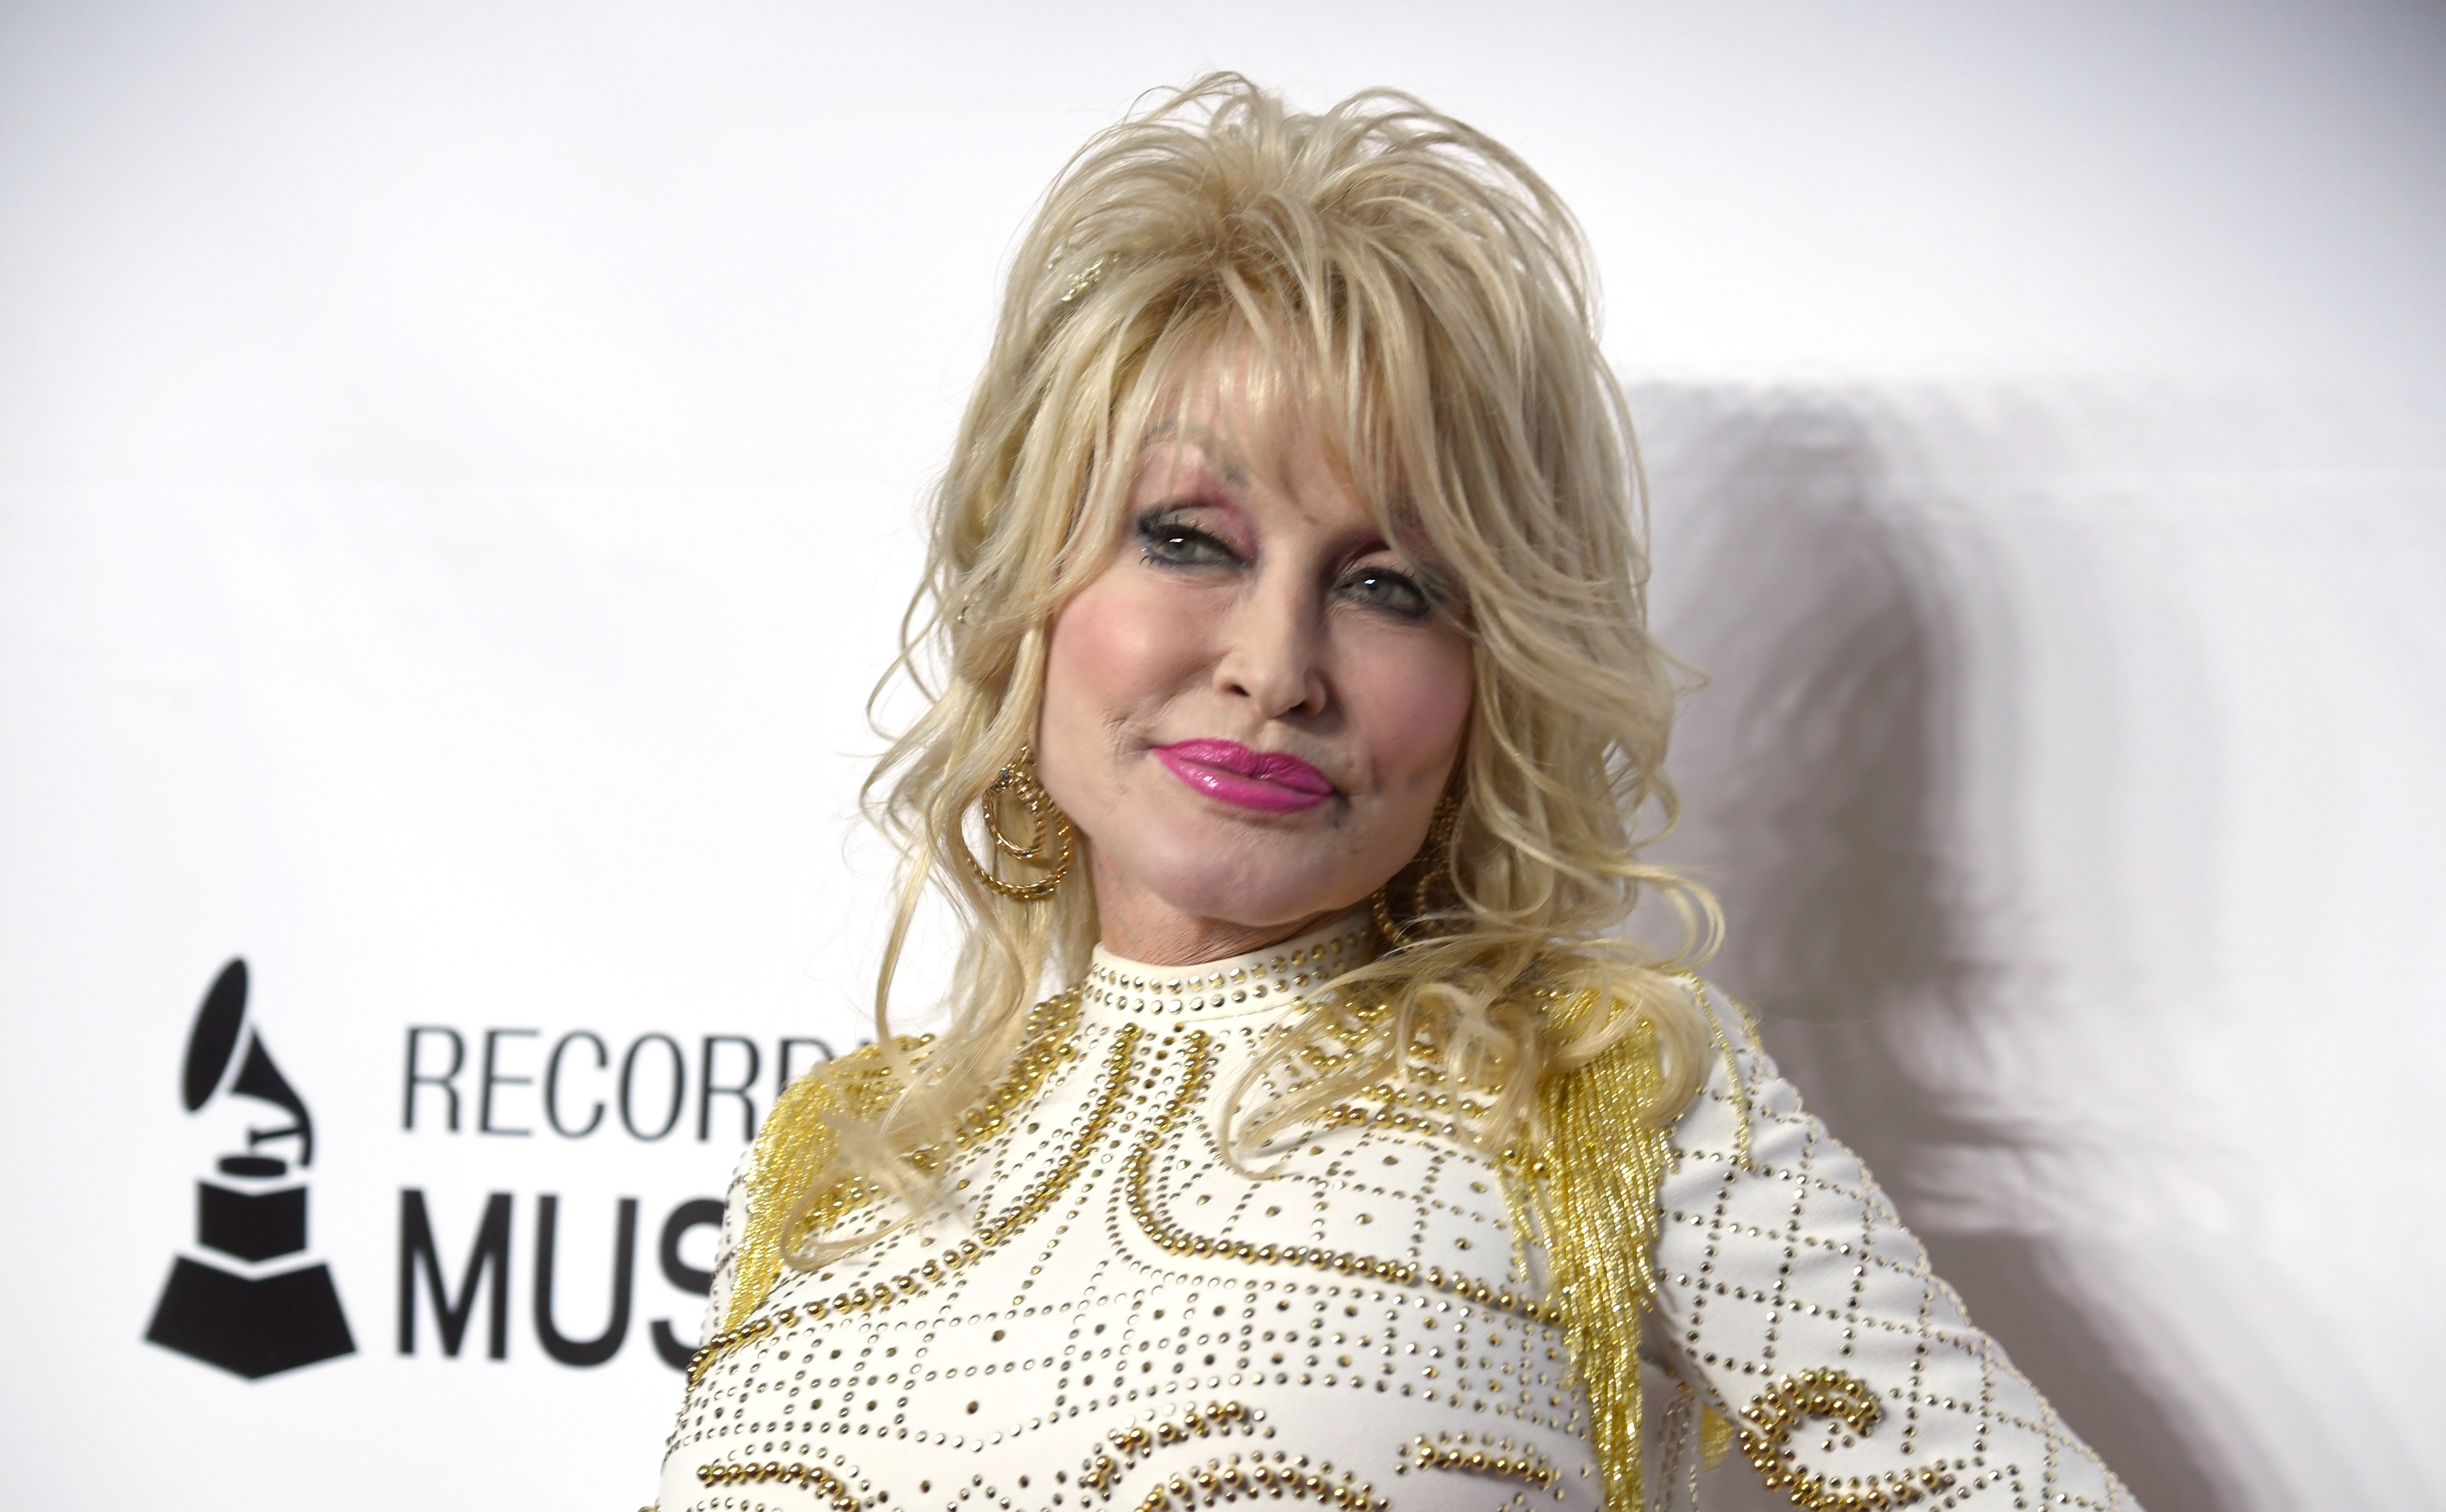 A close-up of Dolly Parton in a white and gold dress at the 2019 MusiCares Person Of The Year Honoring Dolly Parton